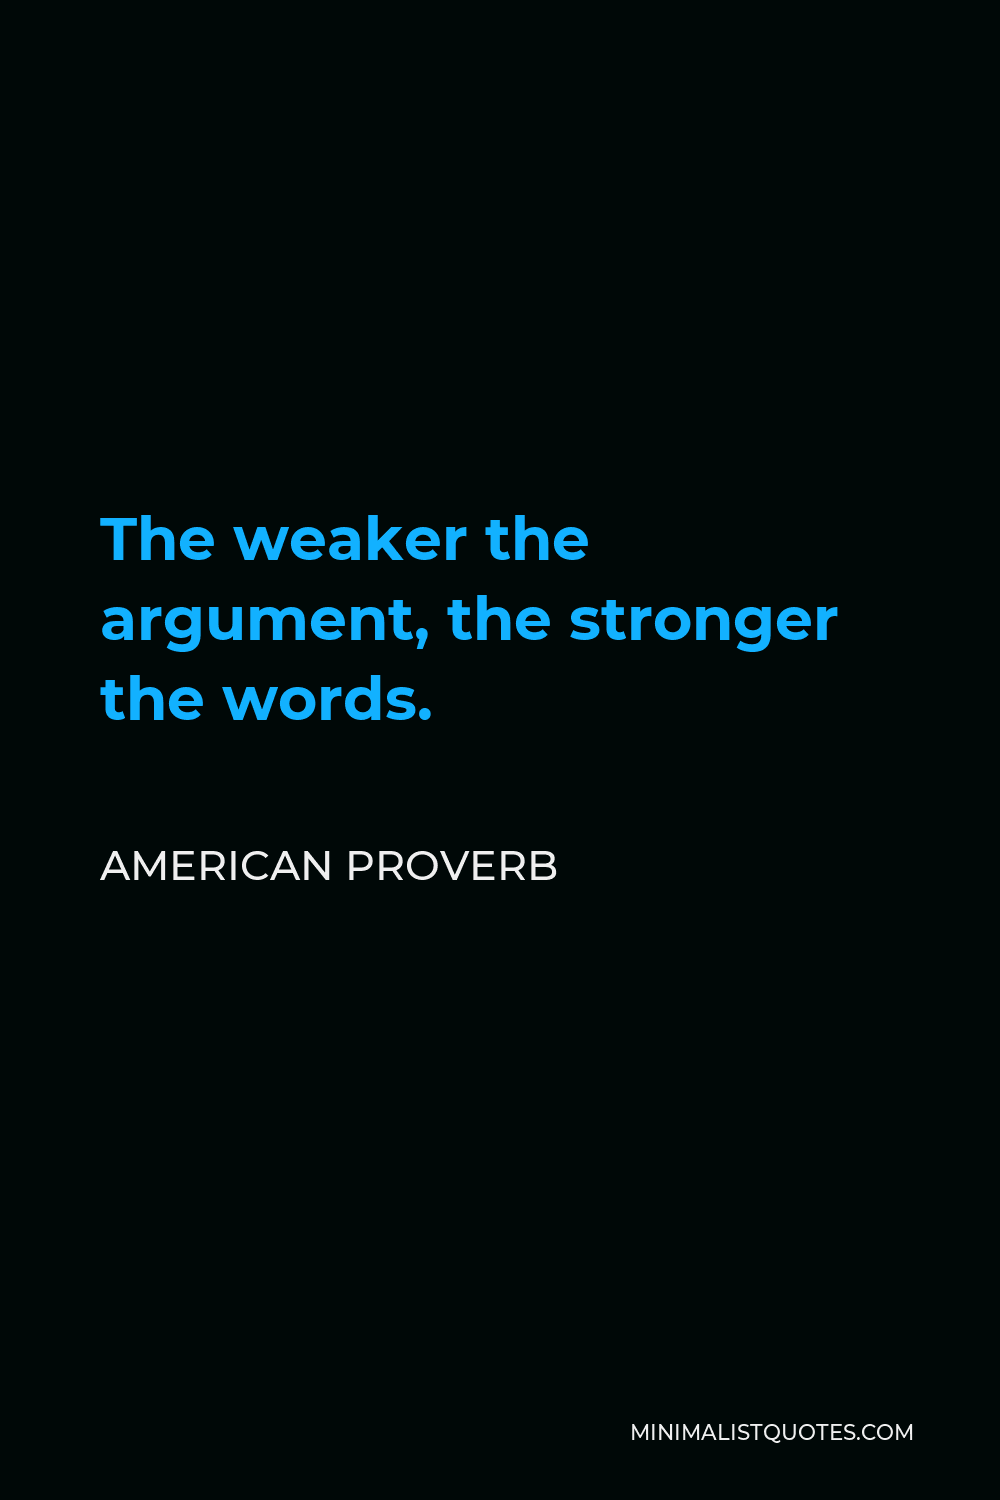 American Proverb Quote - The weaker the argument, the stronger the words.